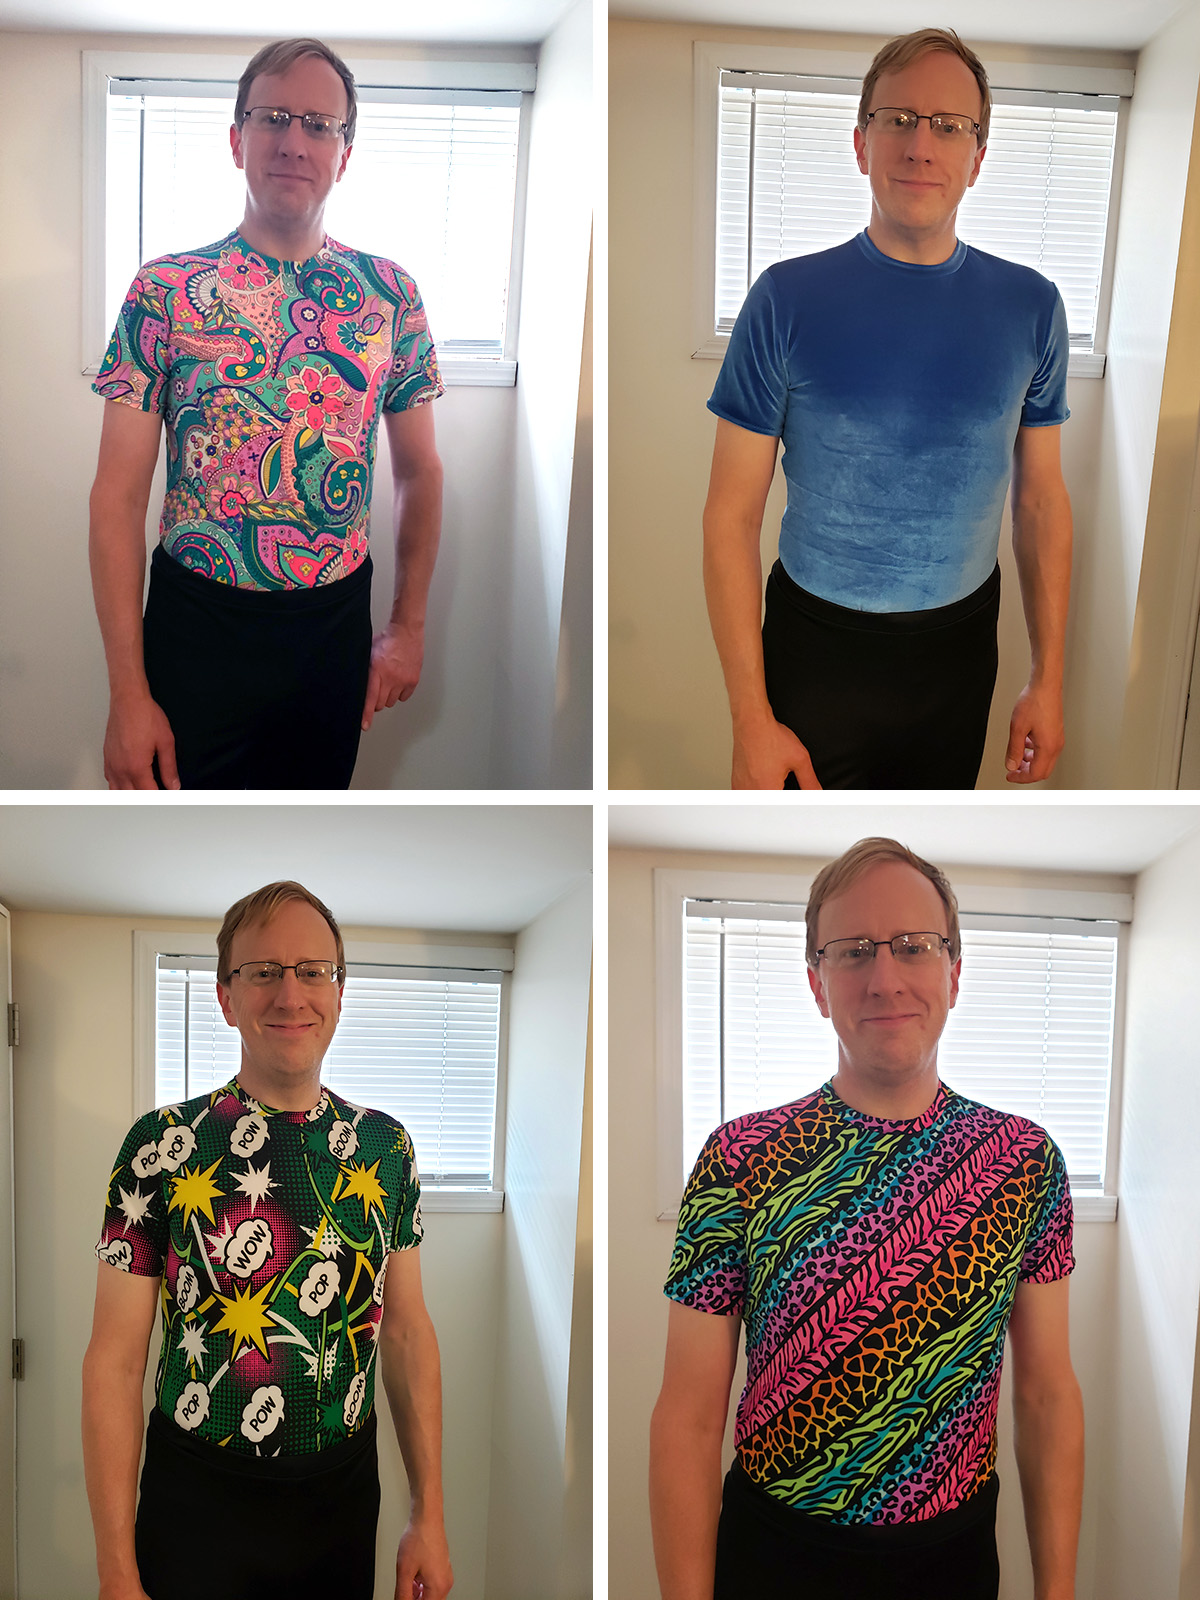 A 4 part image showng a middle aged blond man wearing 4 different brightly coloured spandex shirts.